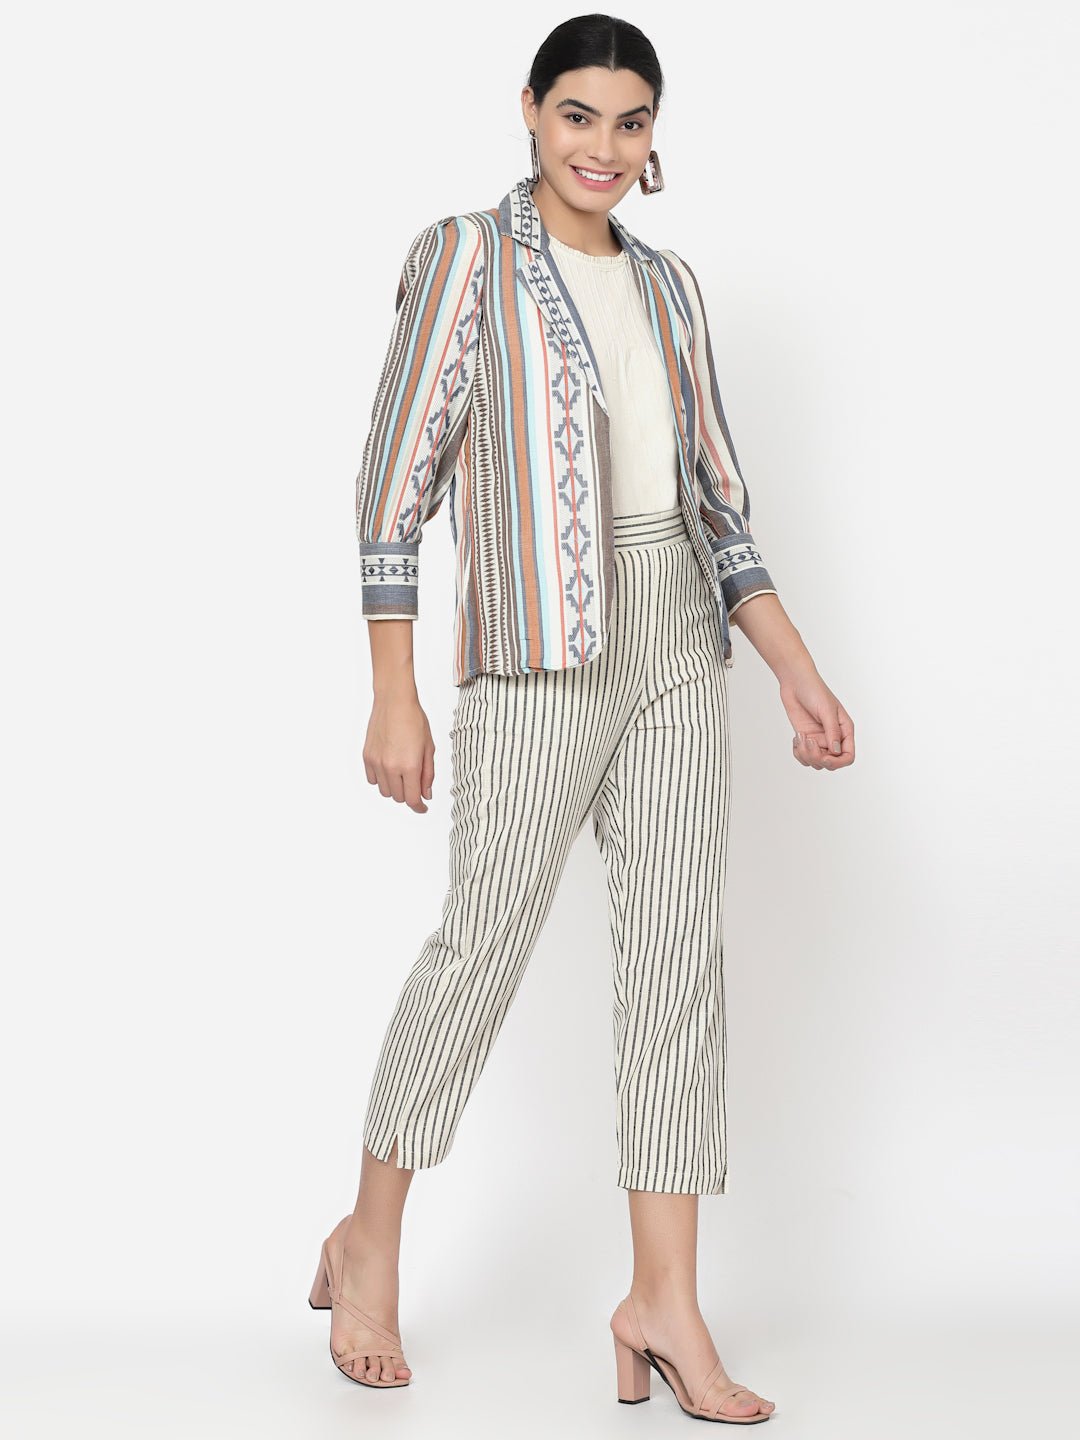 Three Piece Co-ord Set with Top, Striped Pants and Cotton Blazer - Dresses - APANAKAH